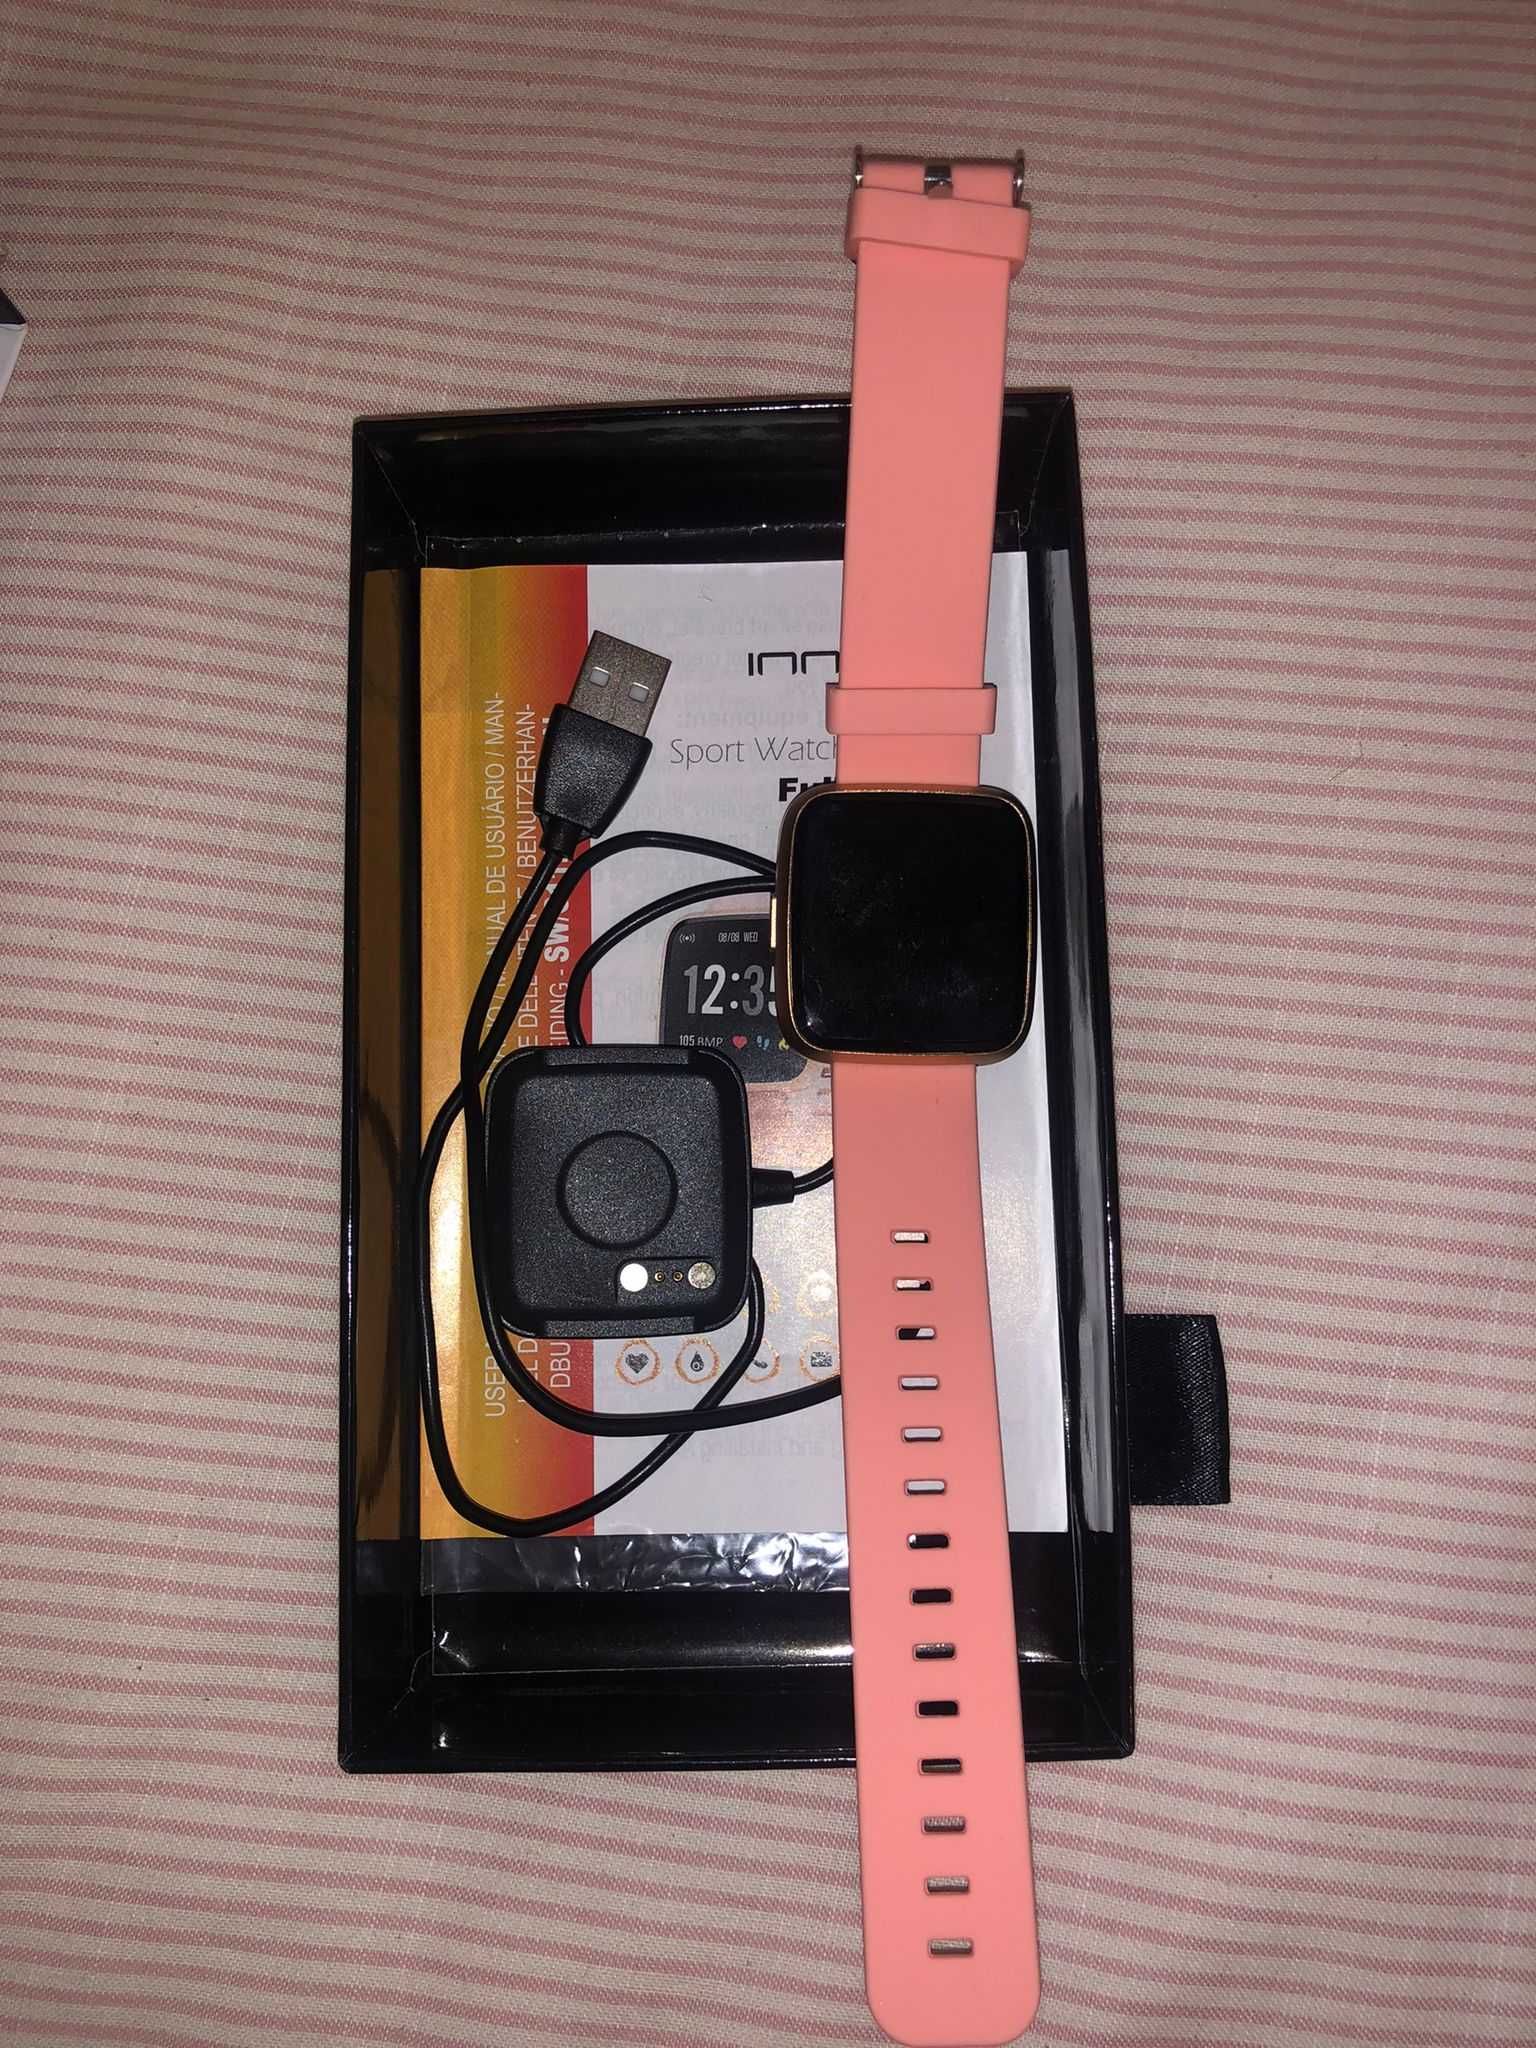 Sport Watch square - full touch